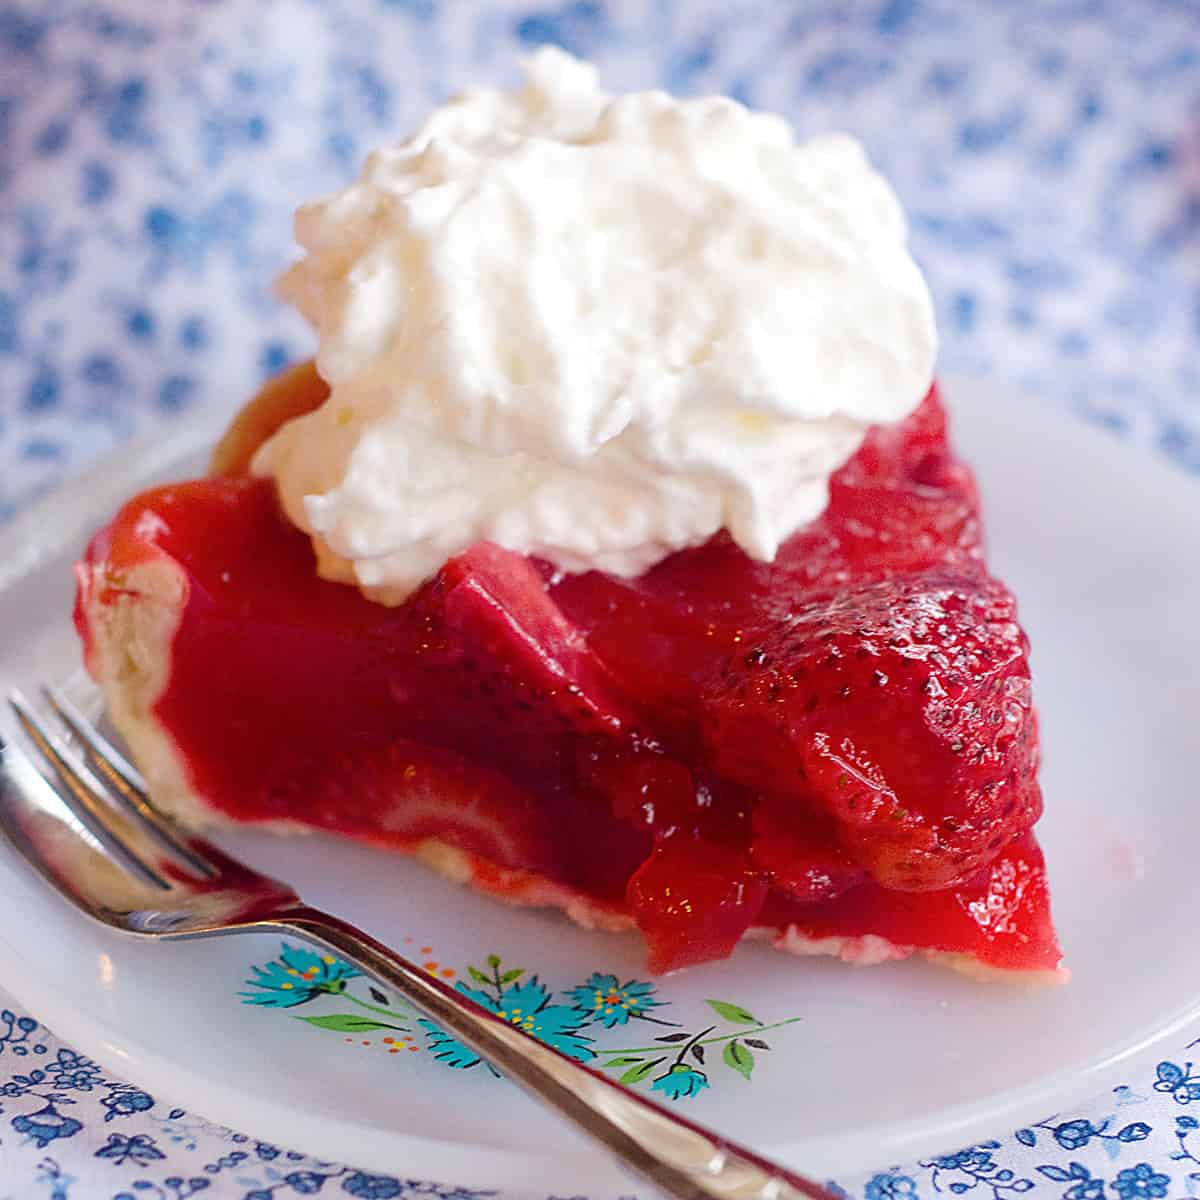 A serving of fresh strawberry pie on a saucer.